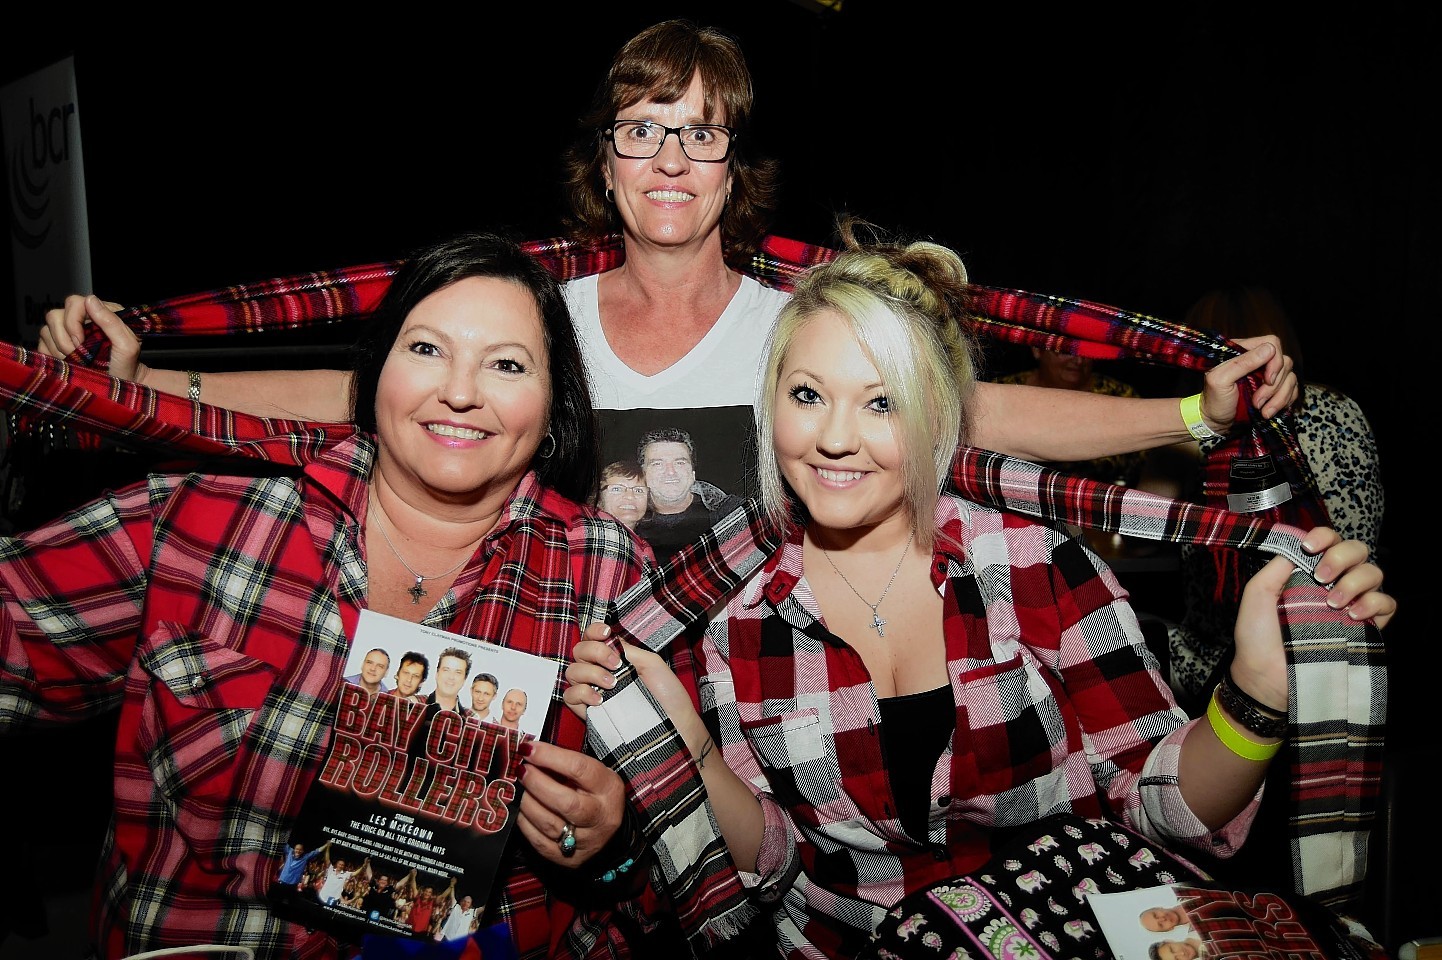 Dawn and Kaitlyn Bright from the USA and Margaret Hayes from Australia attended the event